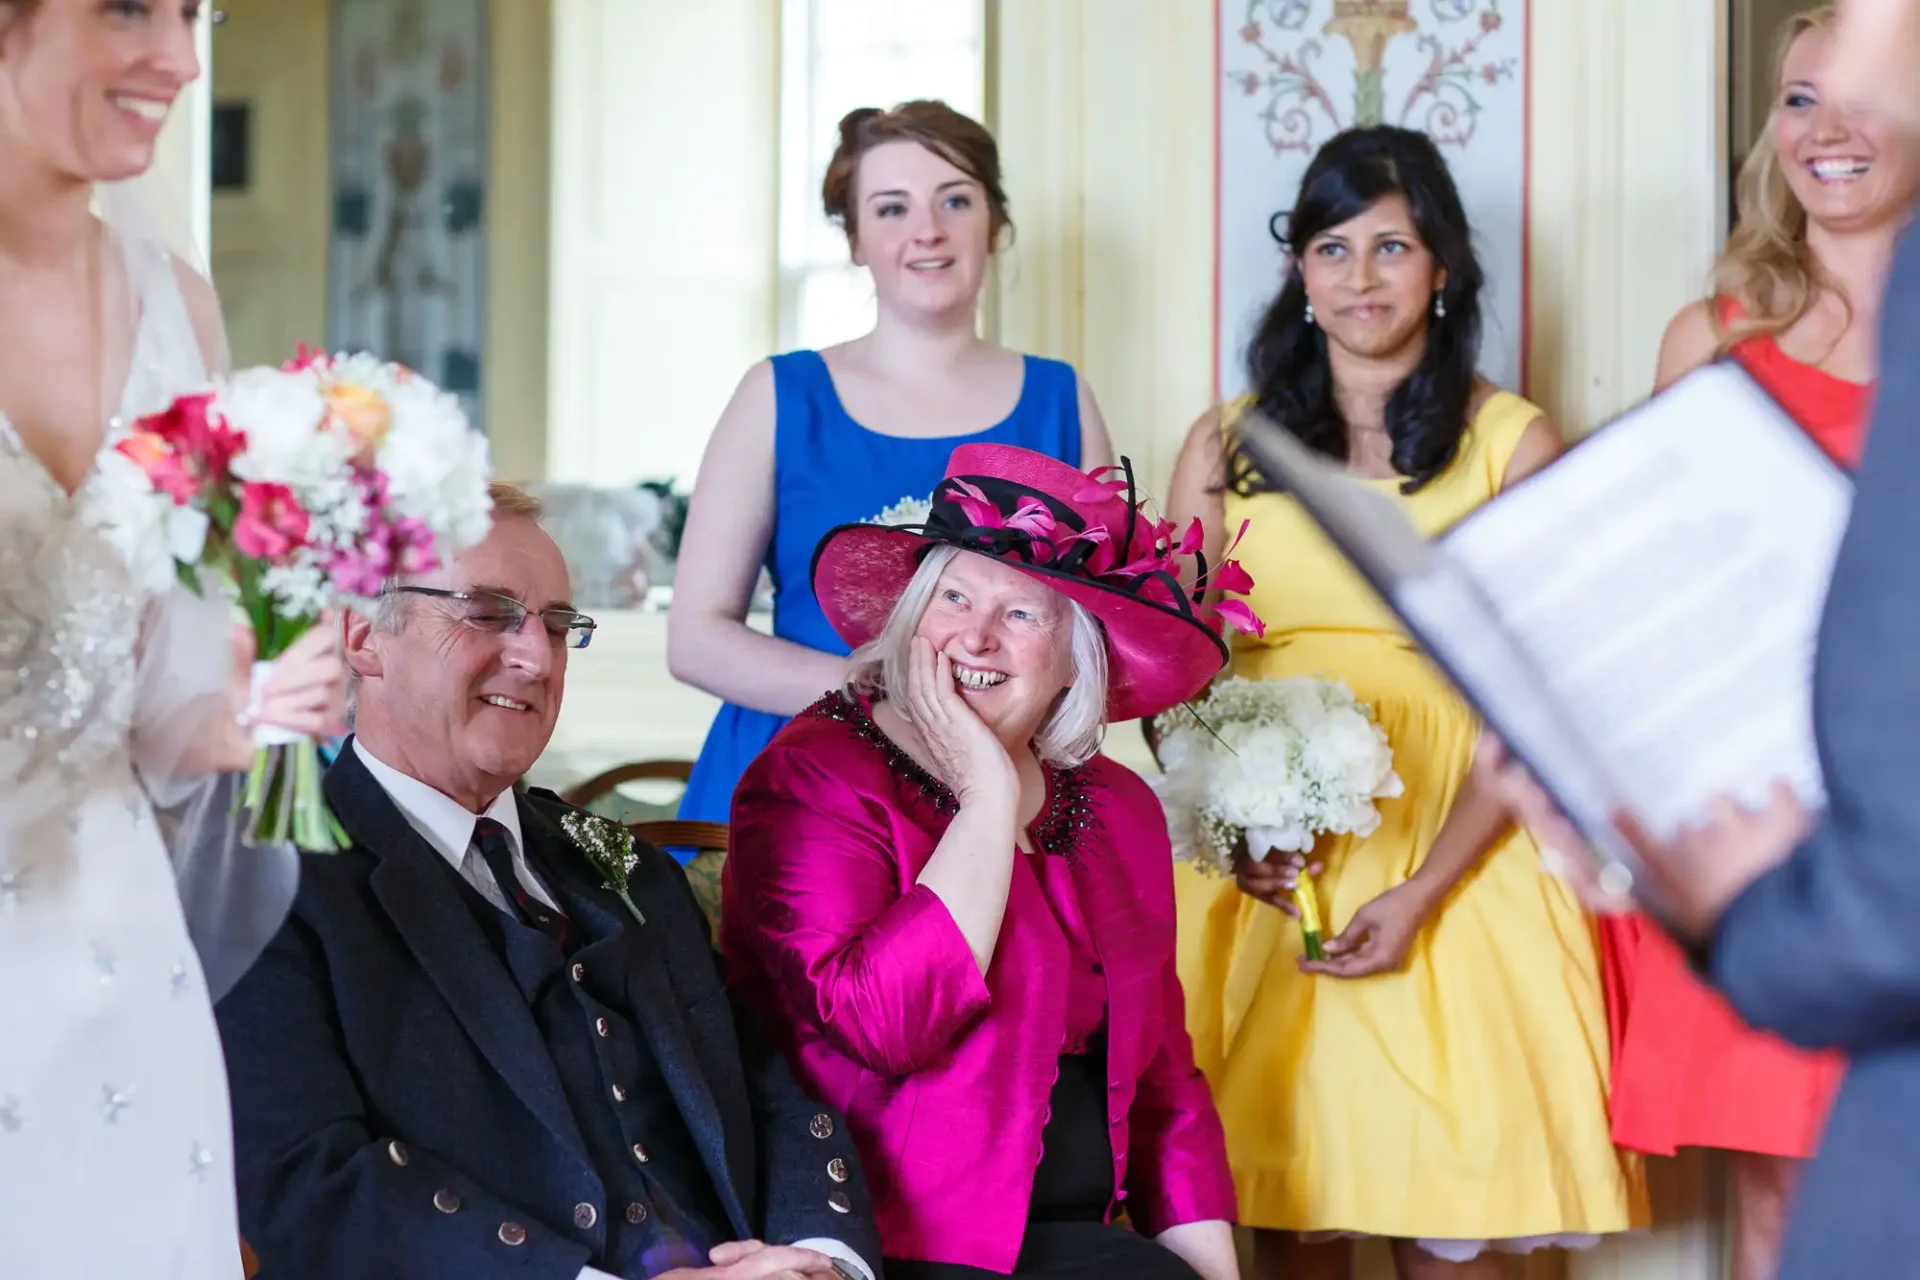 A joyful wedding scene with guests smiling and an older woman in a pink hat laughing, surrounded by people including a bride holding flowers.